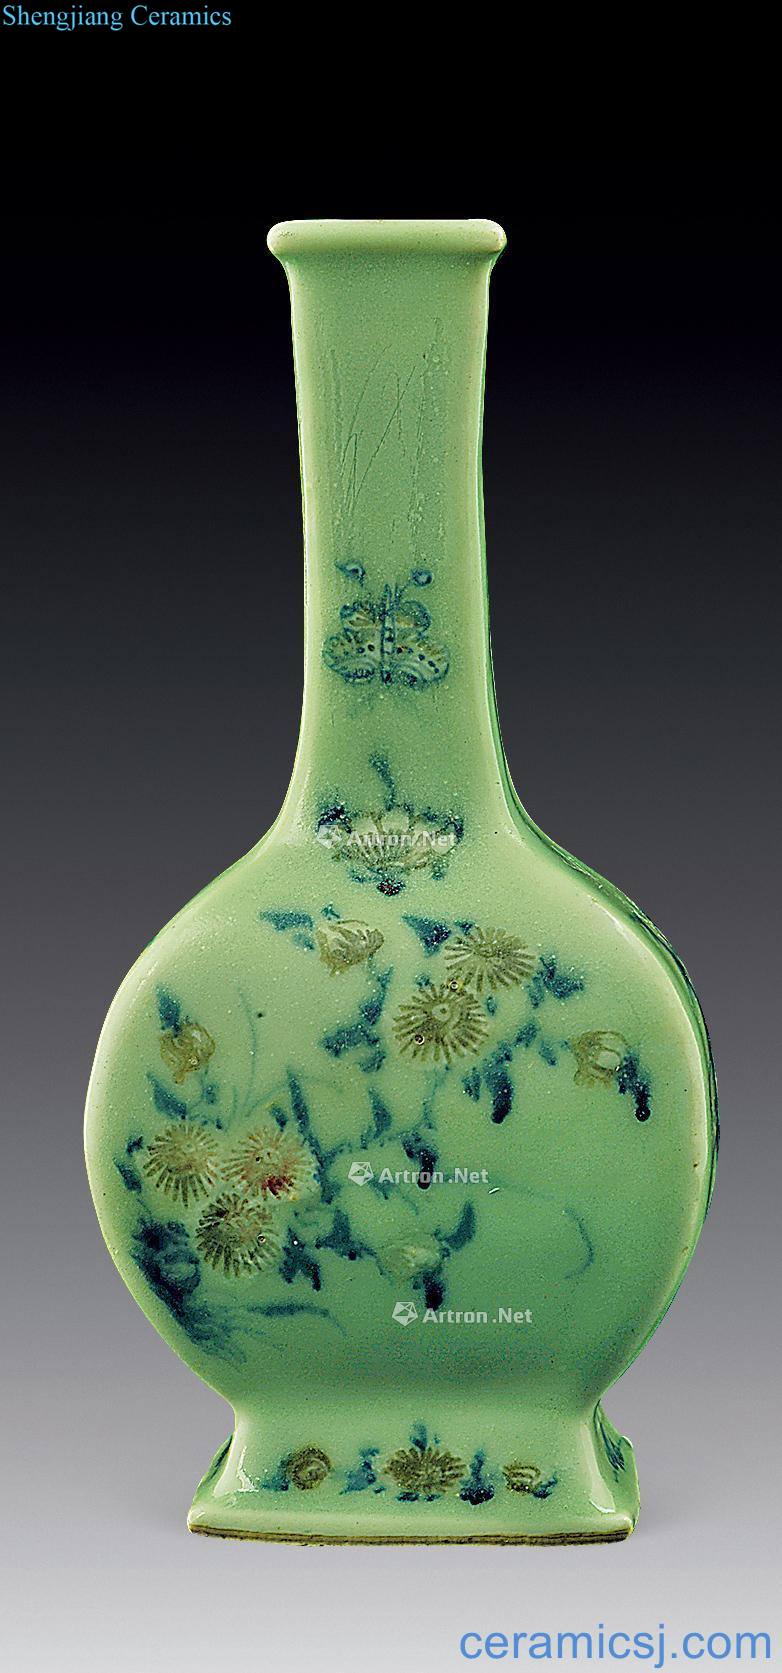 In the qing dynasty Green blue youligong bottle